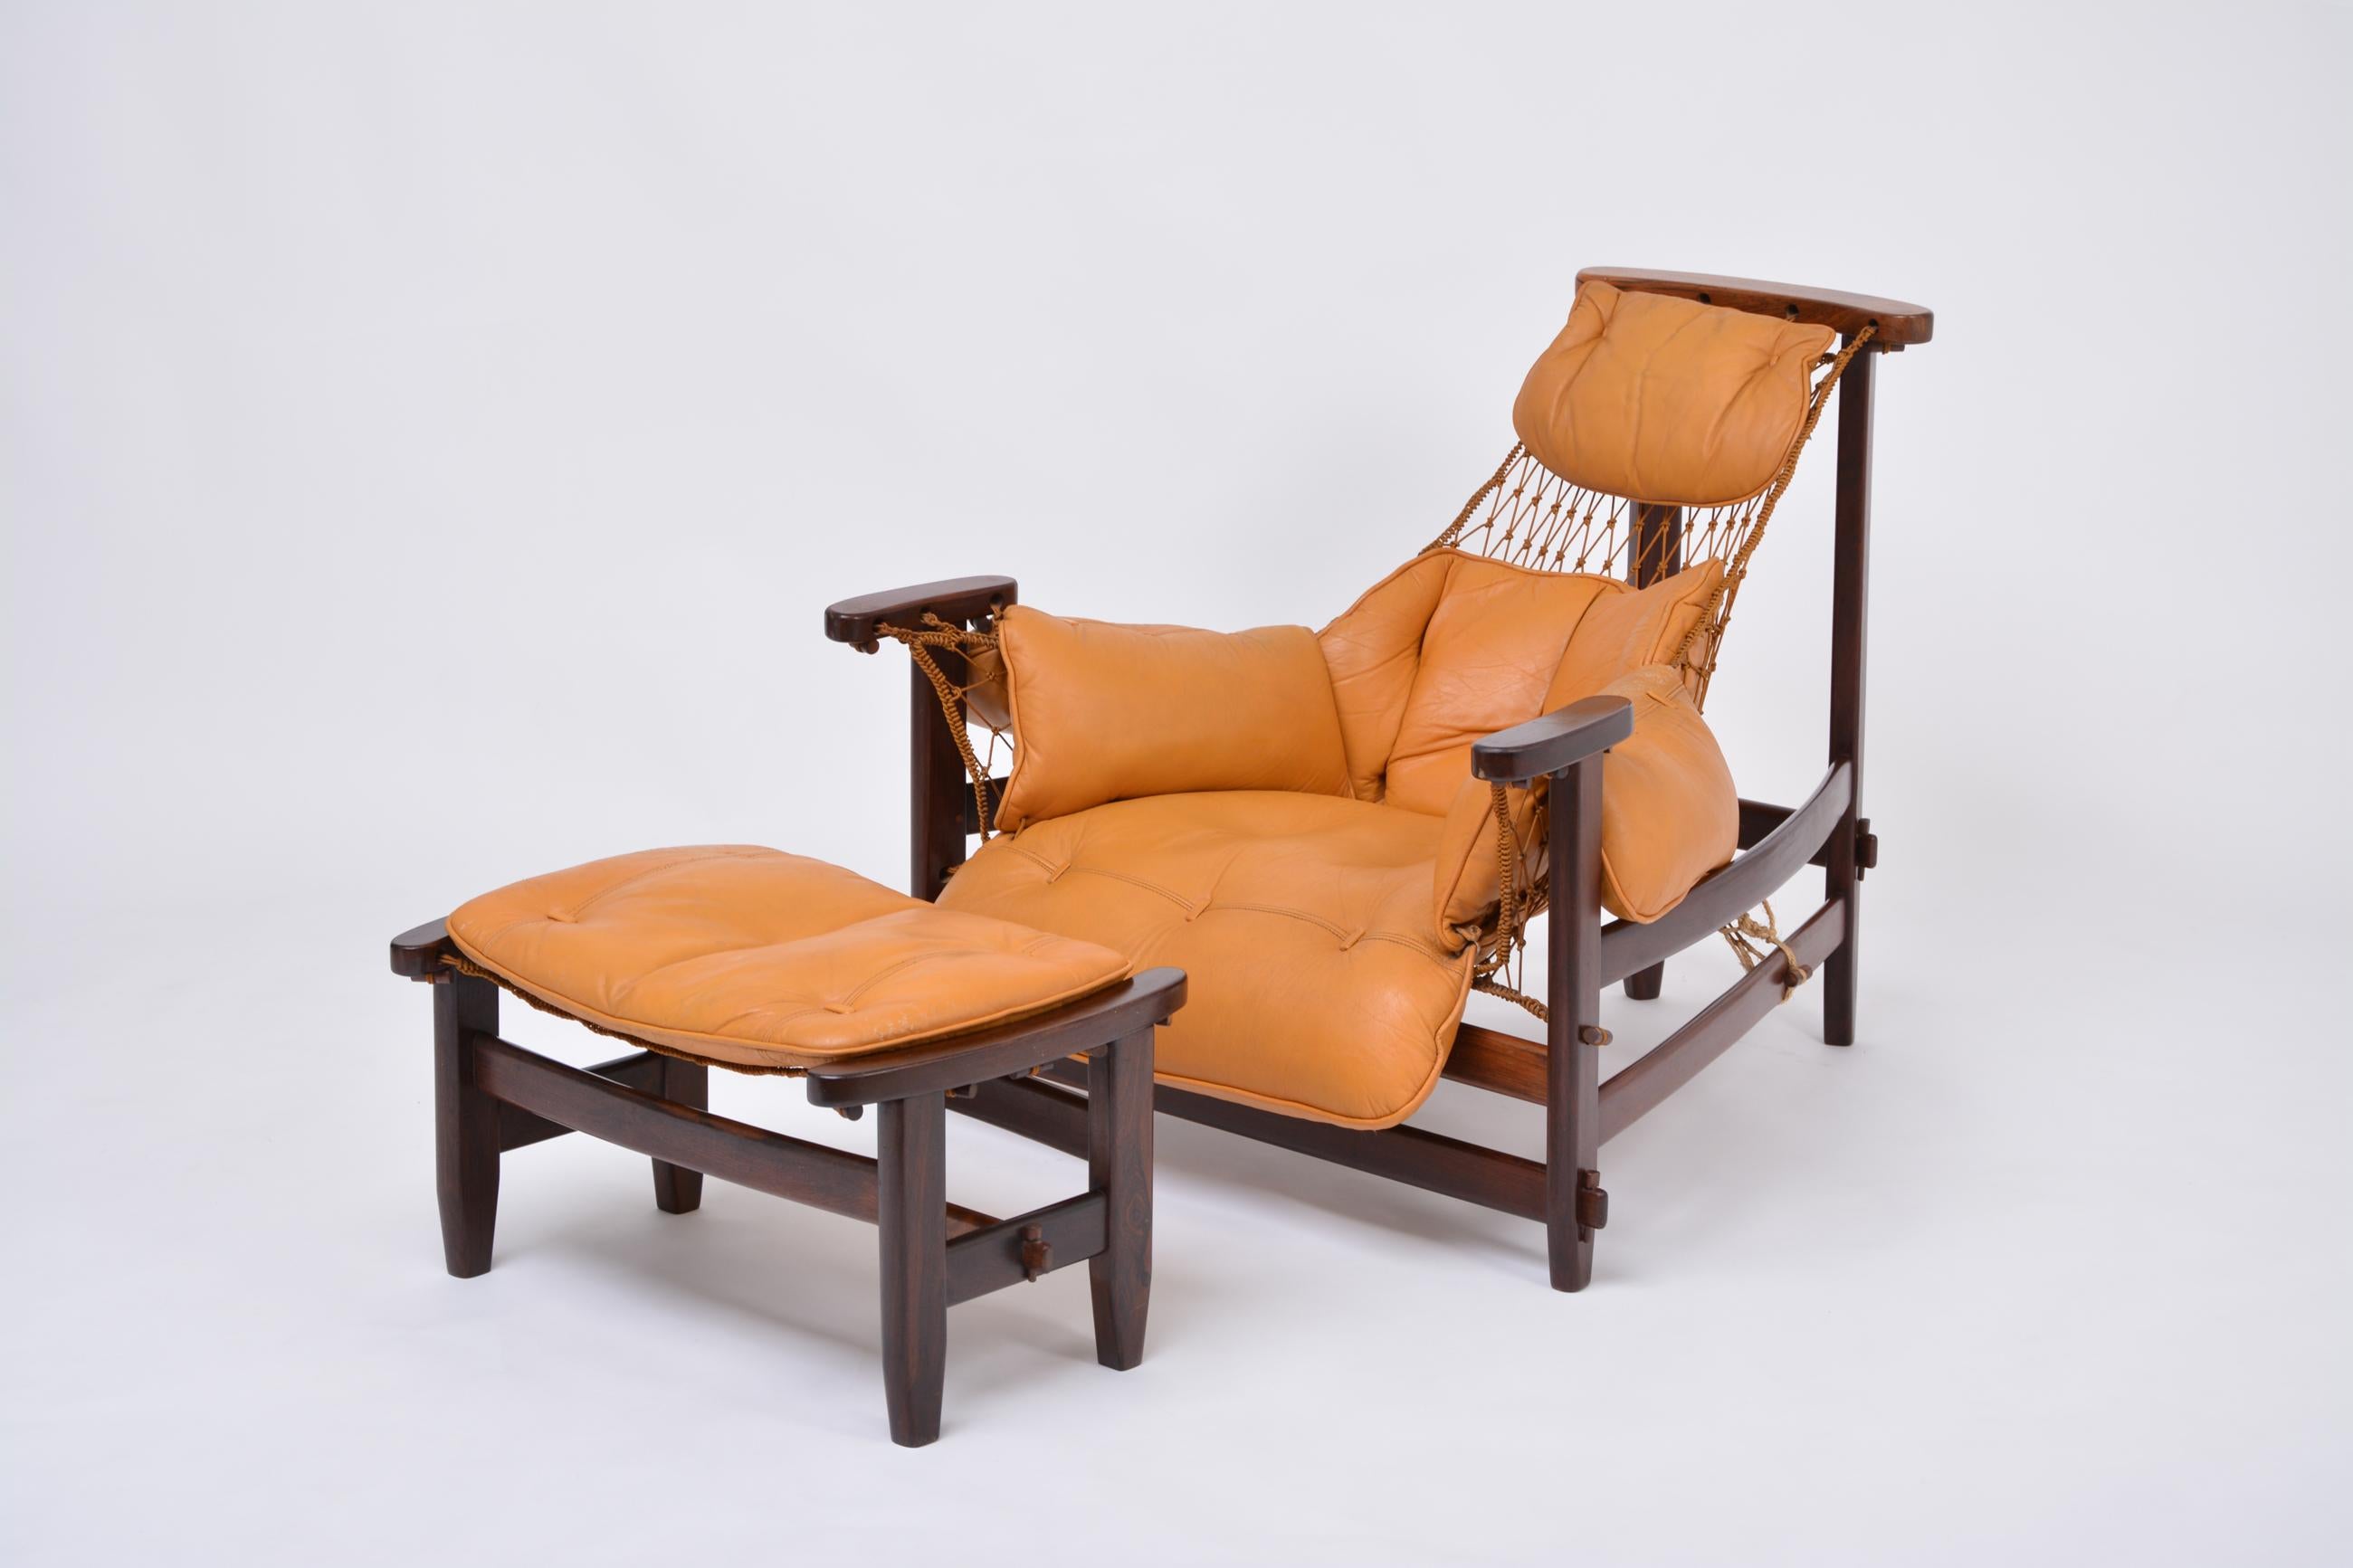 Iconic Brazilian jangada lounge chair with ottoman by Jean Gillon, 1968
Romanian-born, naturalized Brazilian Jean Gillon was an architect-designer best known for his design firm Italma Wood Art, for which he designed a range of furniture